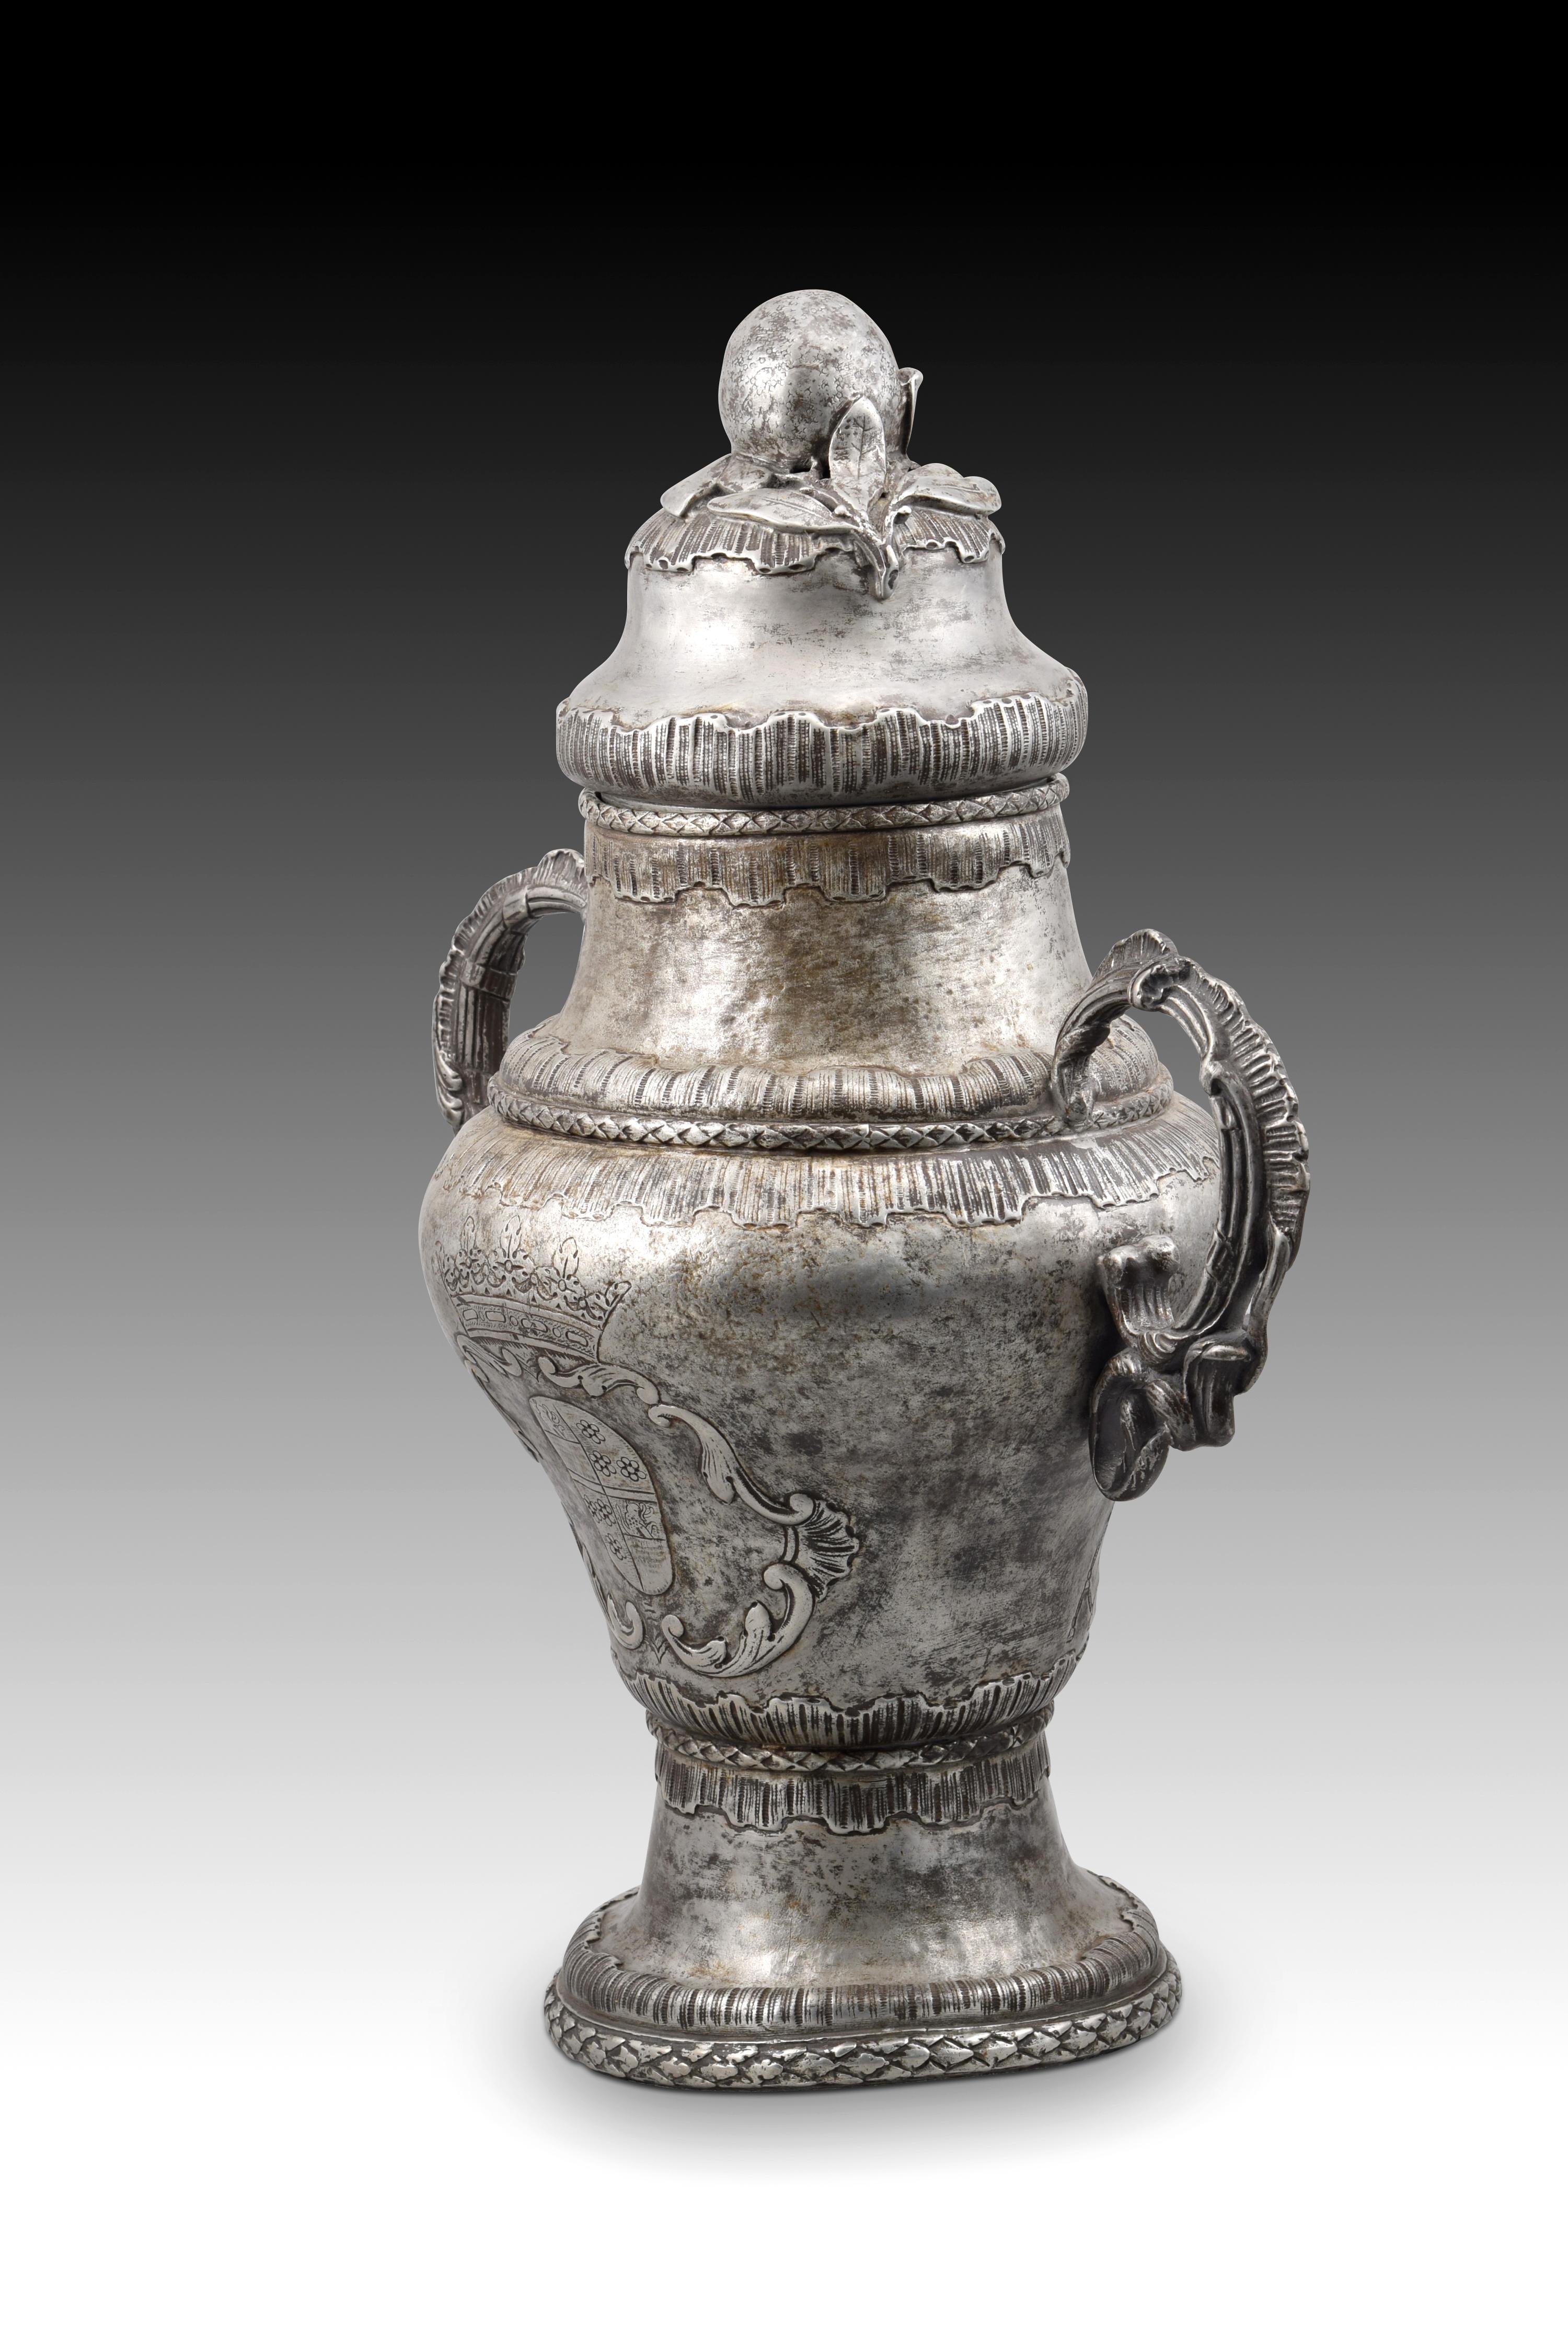 Santos Oils container. Pewter. Century XVIII. 
Container made of pewter that has a foot, a body with curves, two handles and a lid. Its exterior decoration shows a clear influence of the European Rococo style of the 18th century (note the seed